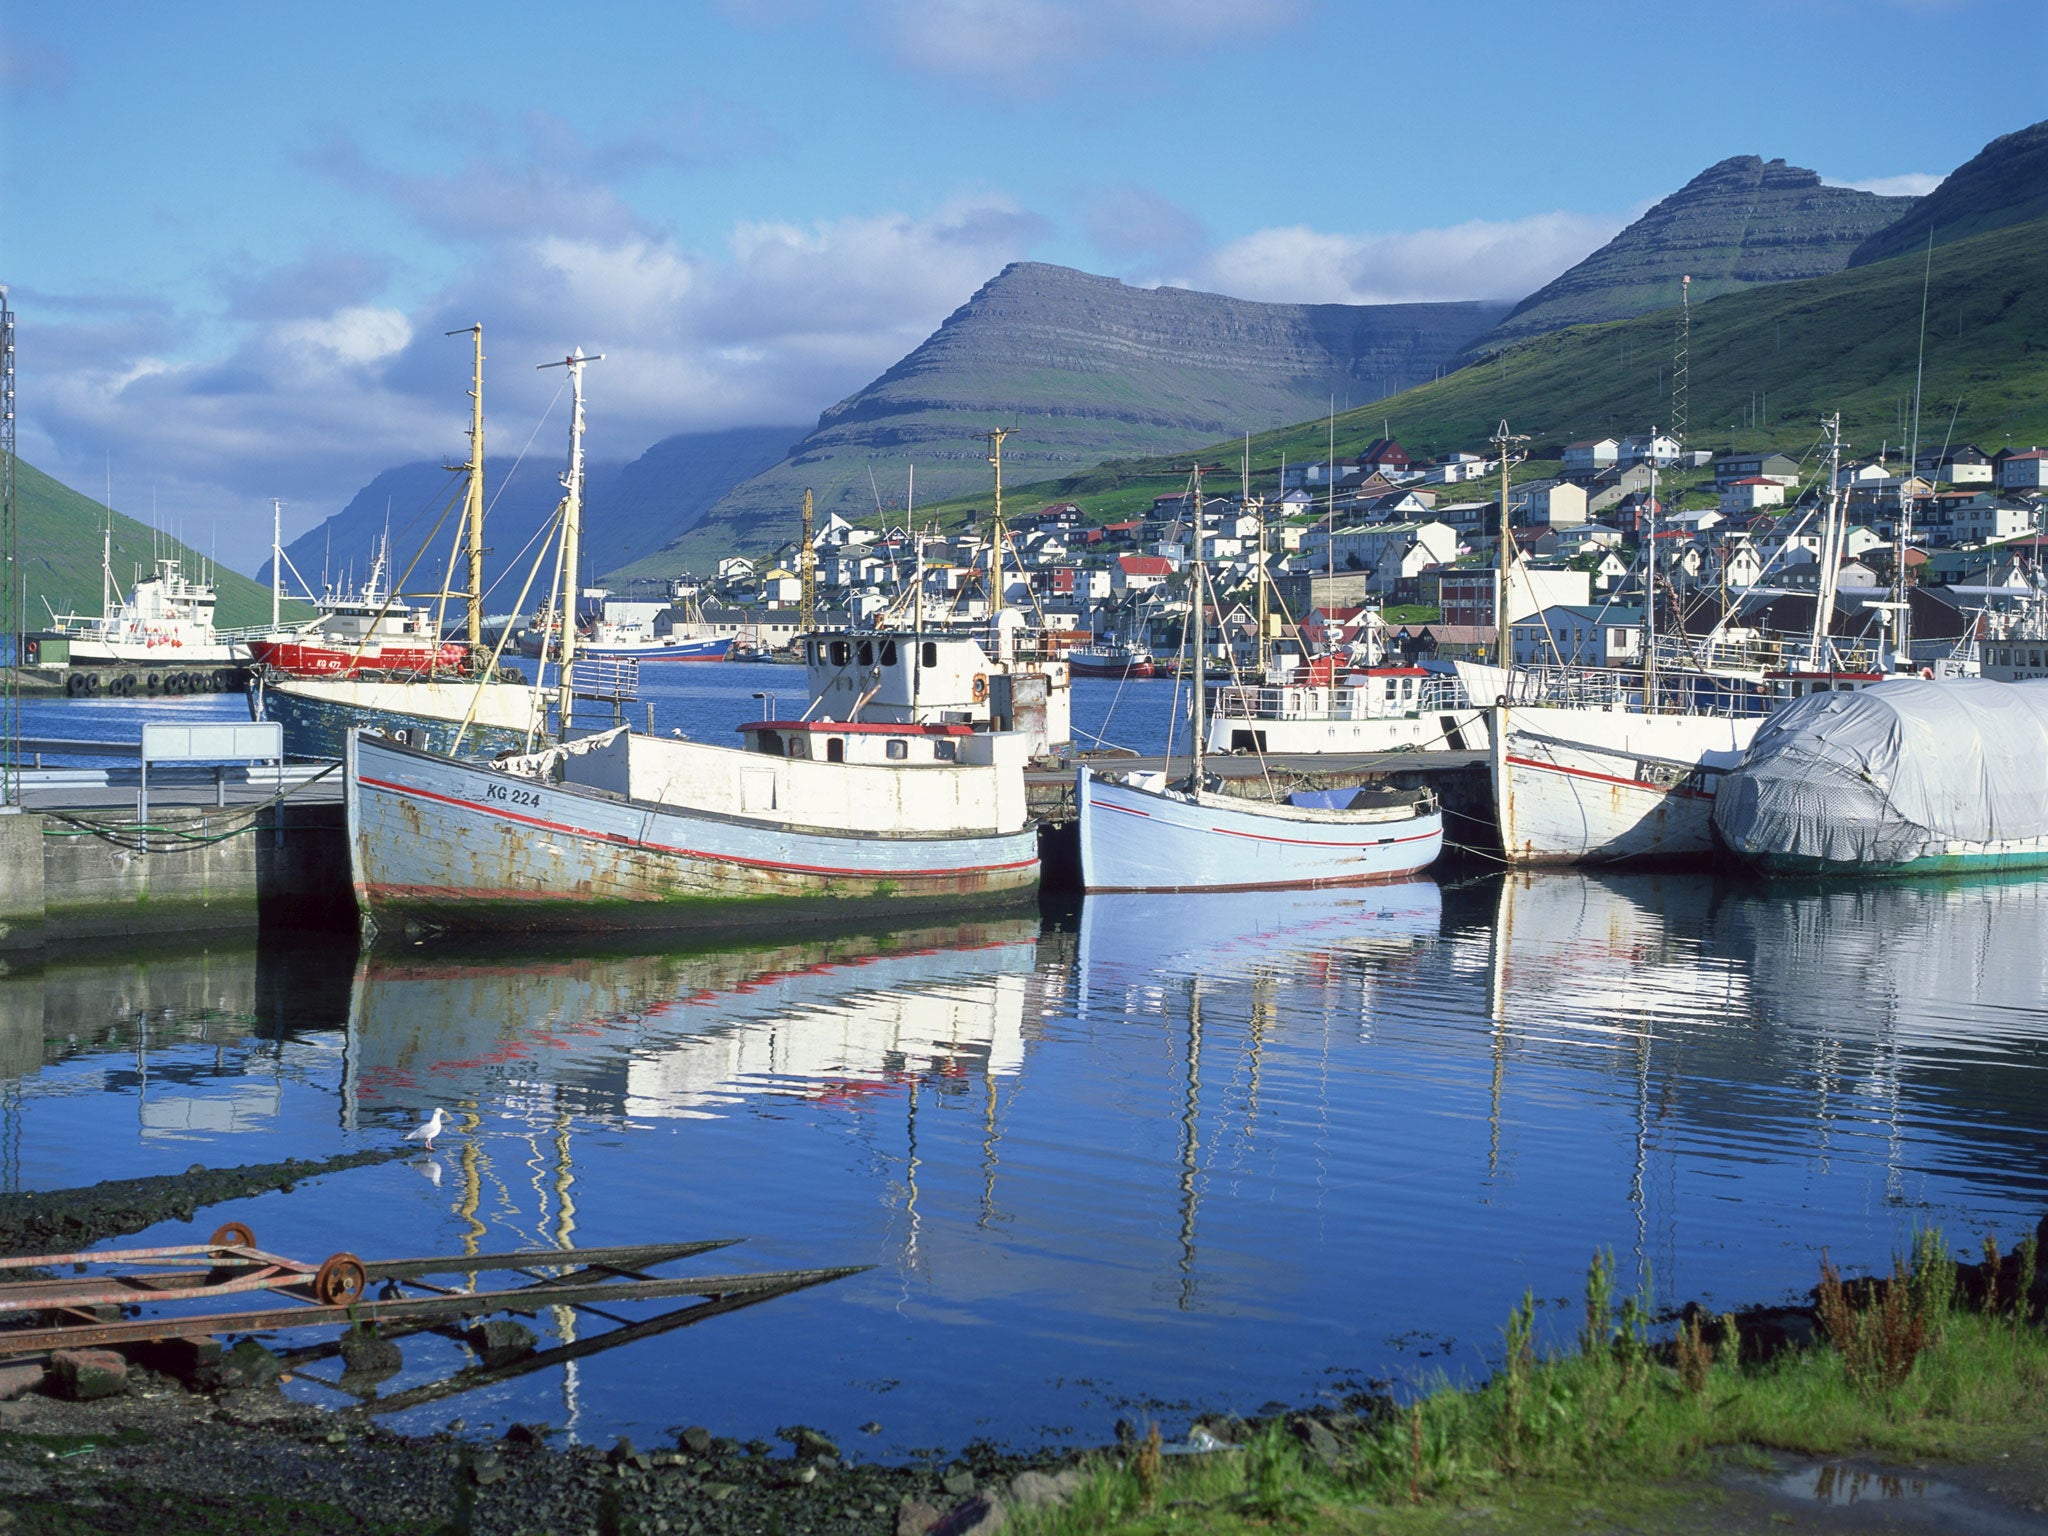 Fishing is the main industry of the Faroe Islands